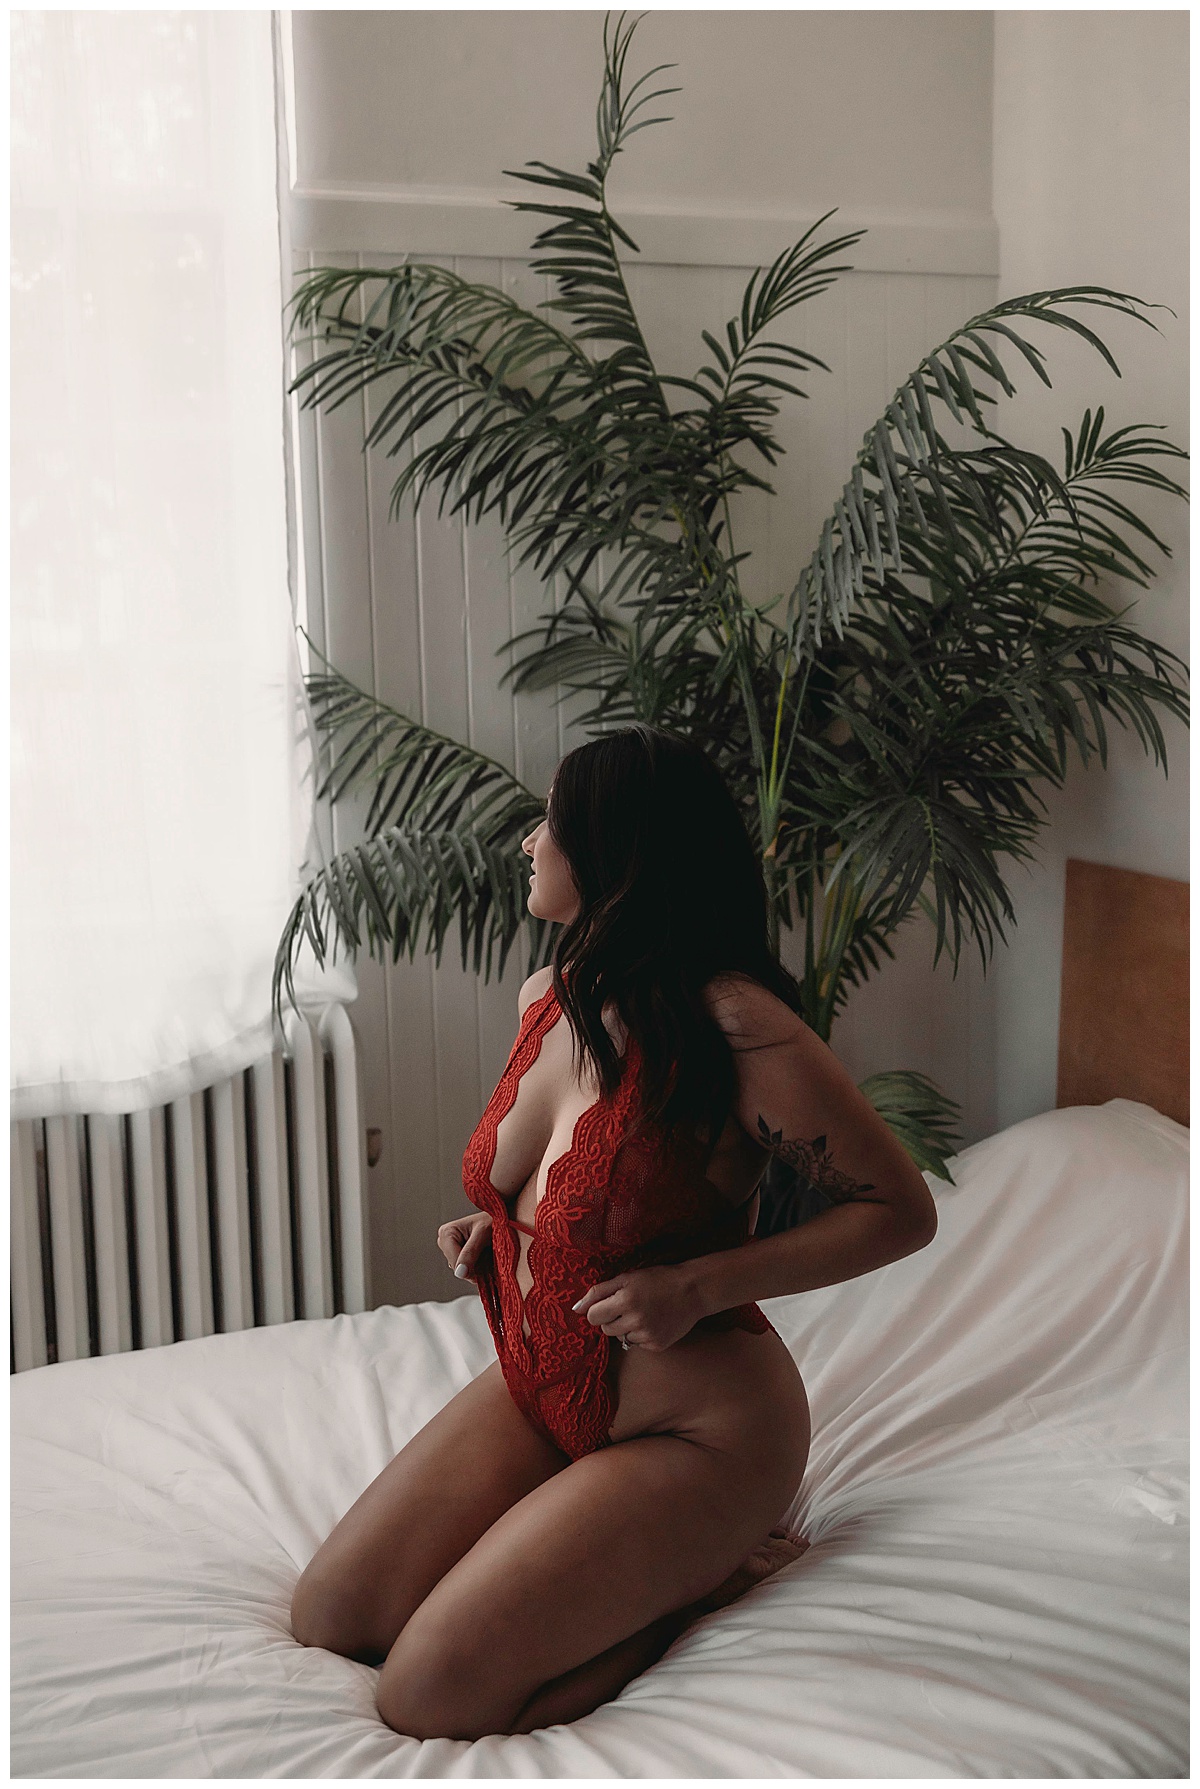 Woman sits on bed in Red Lace Lingerie